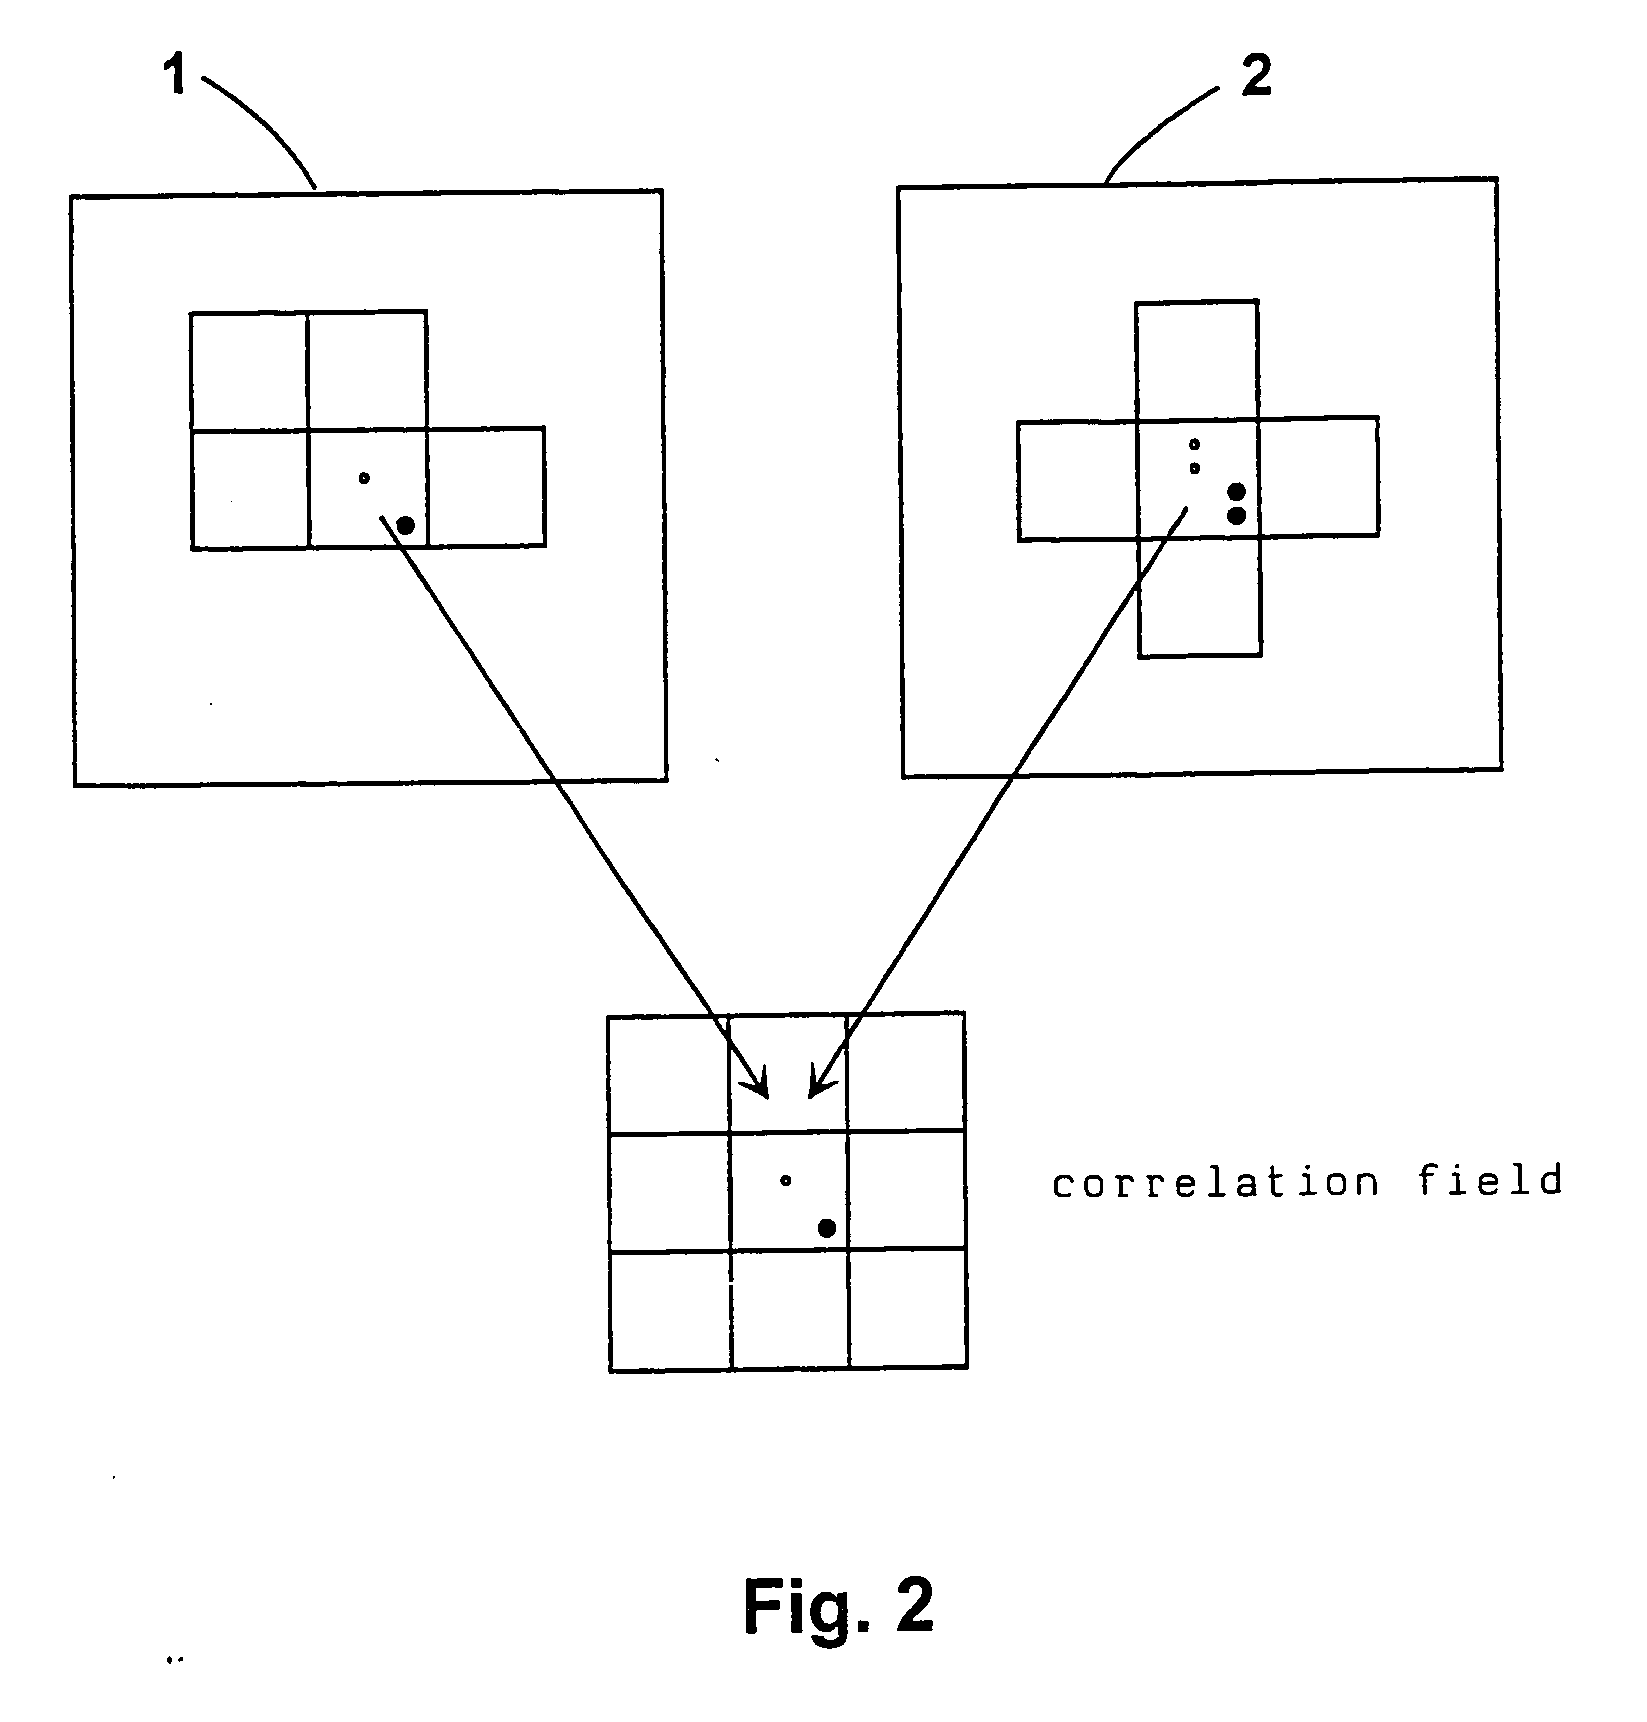 Method of determining the imaging equation for self calibration with regard to performing stereo-PIV methods